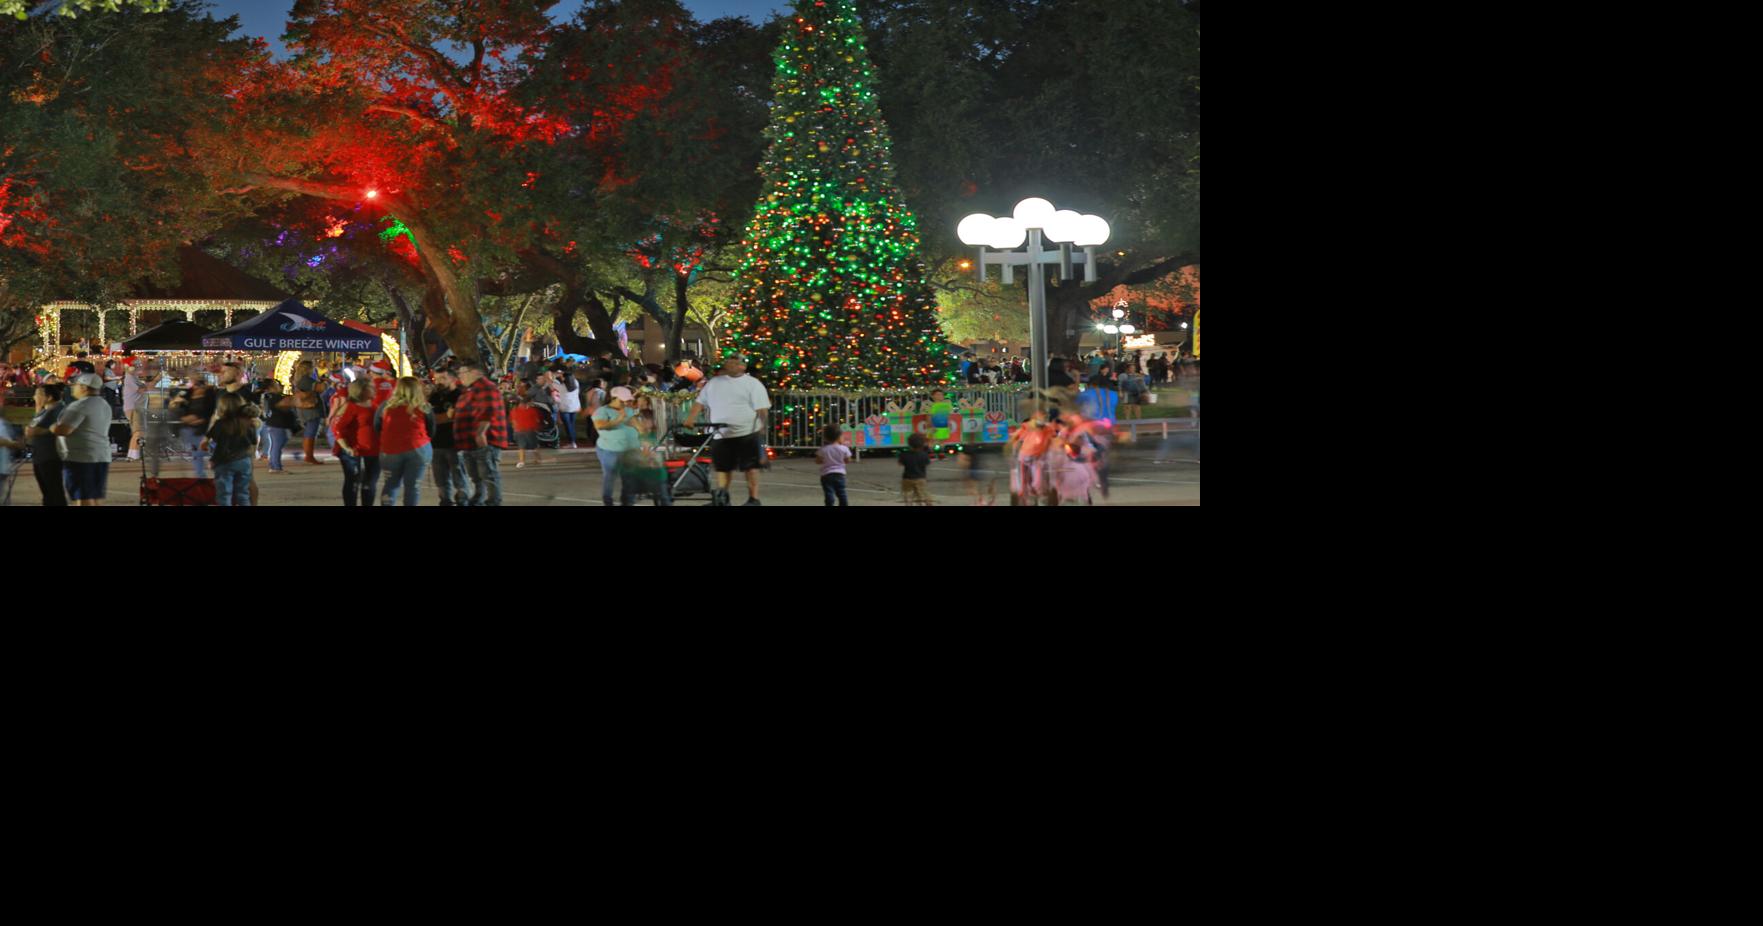 Gallery: Victoria Christmas on the Square 2022